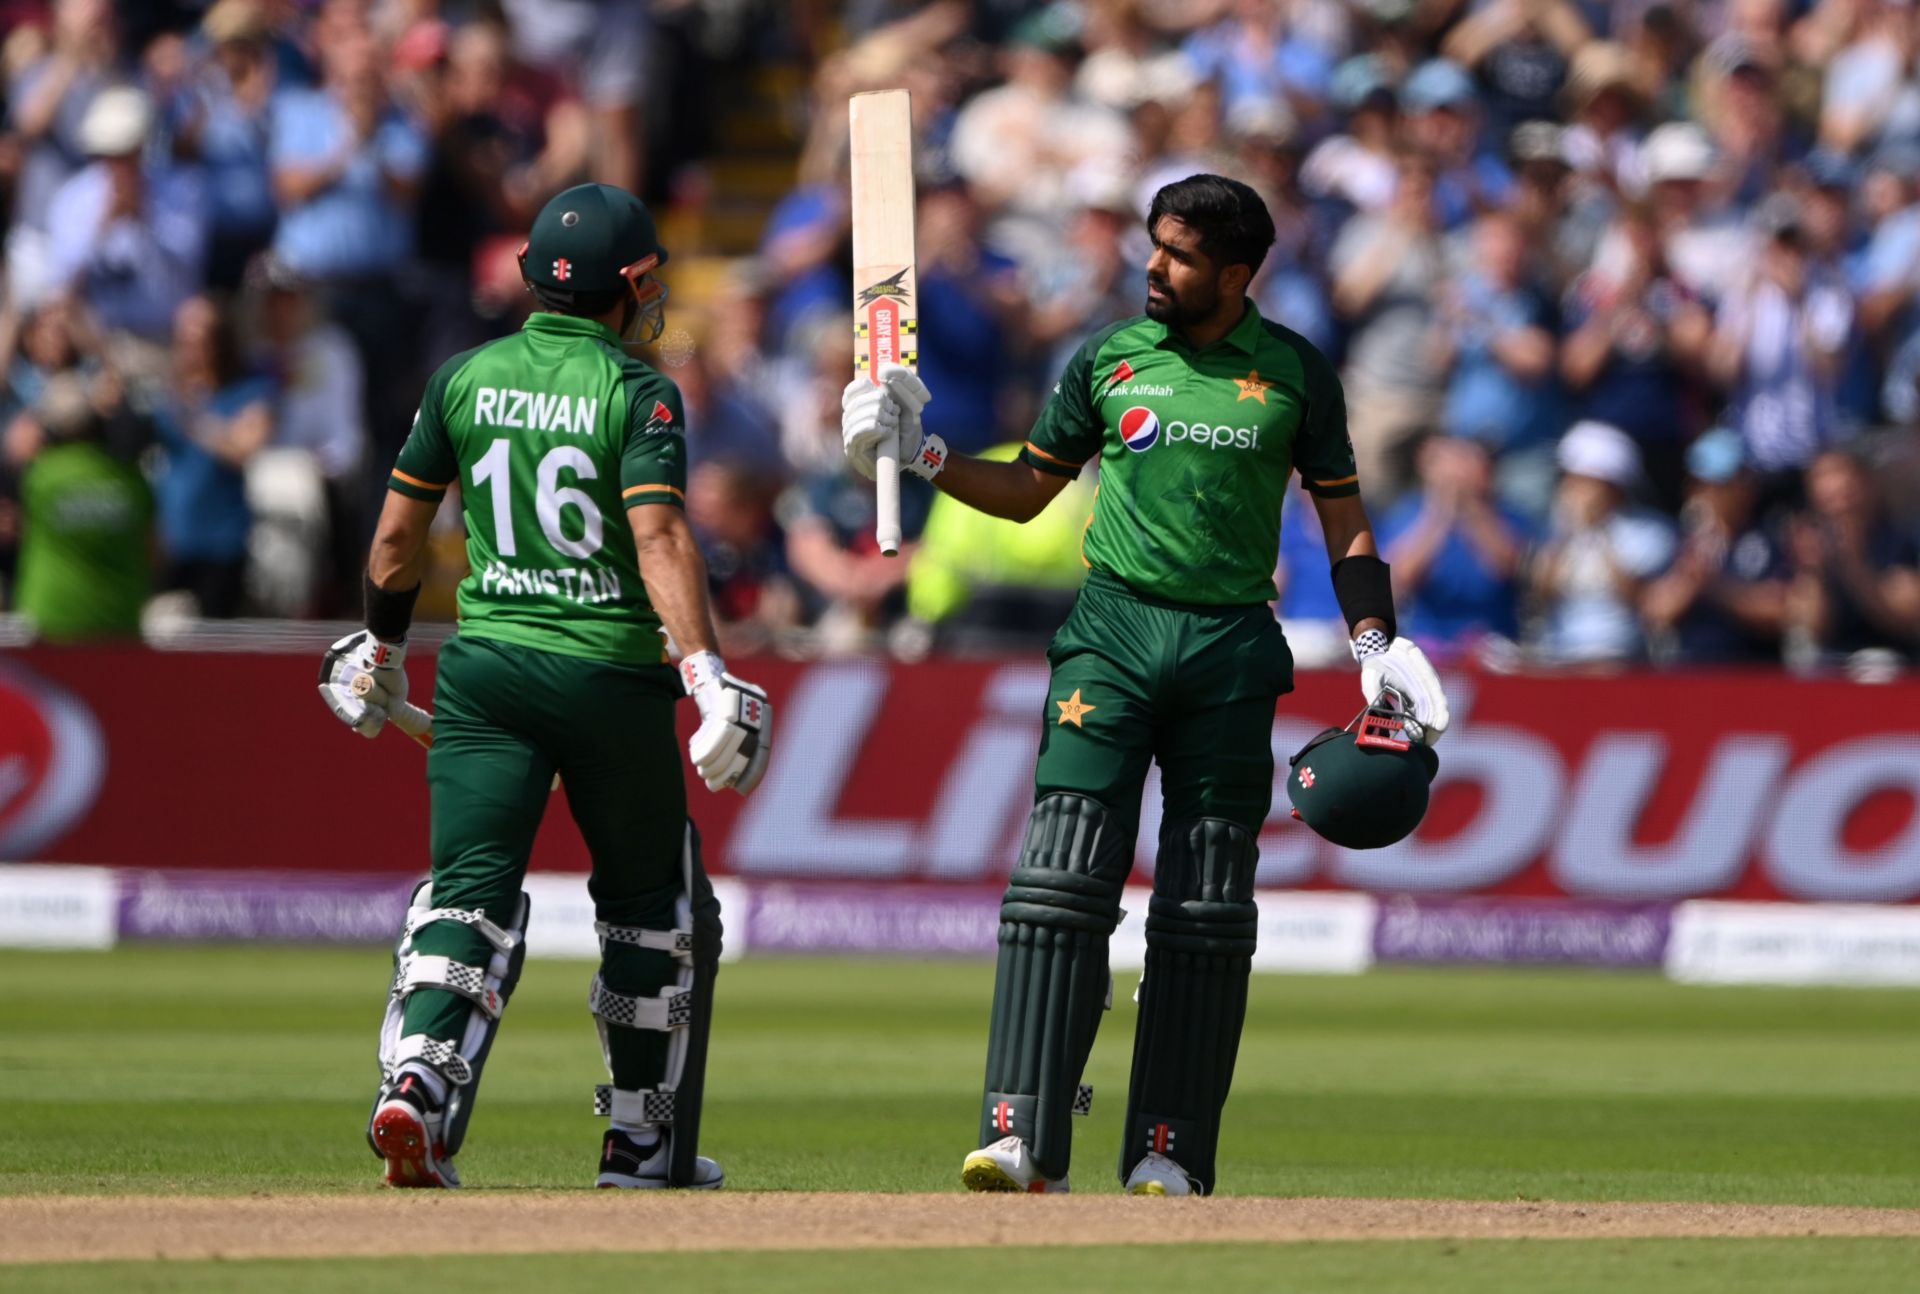 Pakistan generally do not look to be explosive at the start of their innings